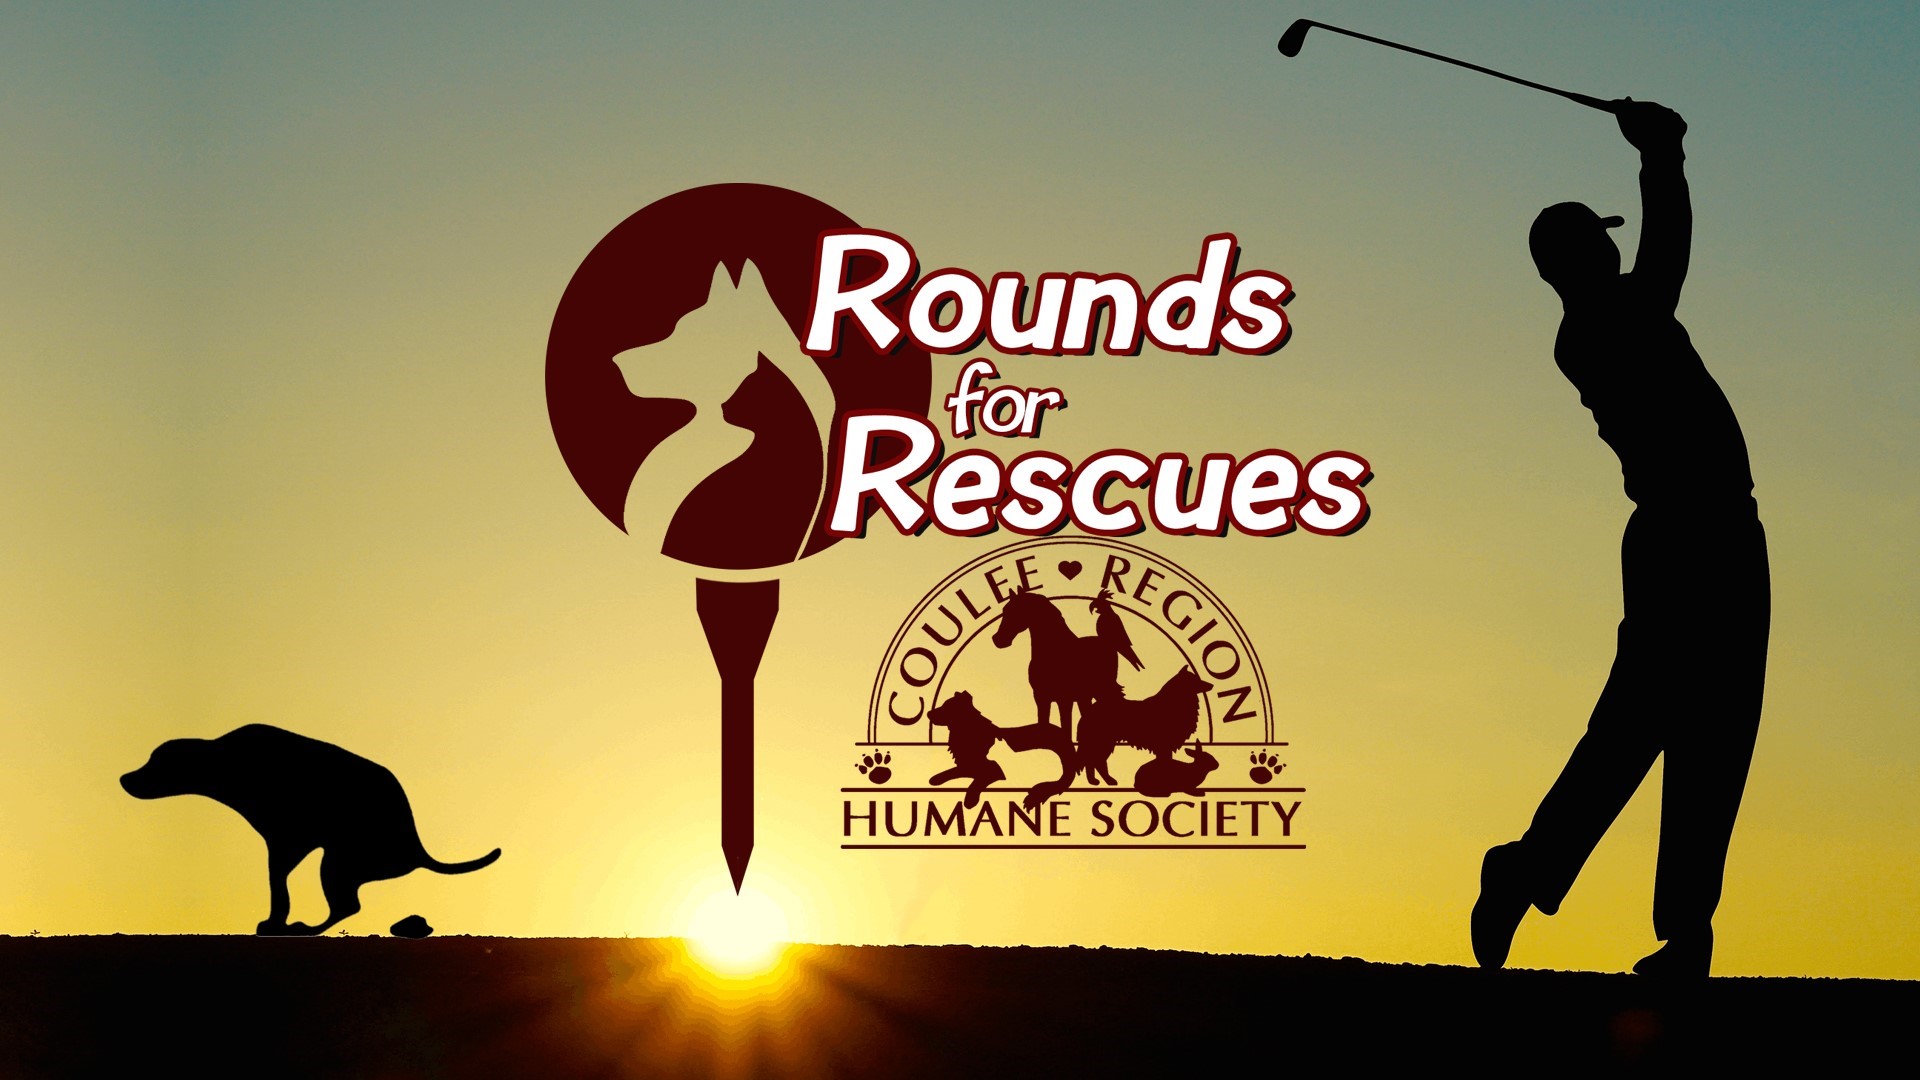 Coulee Region Humane Society doesn’t approve of taking pet therapy dogs on golf course, during Rounds For Rescues fundraiser